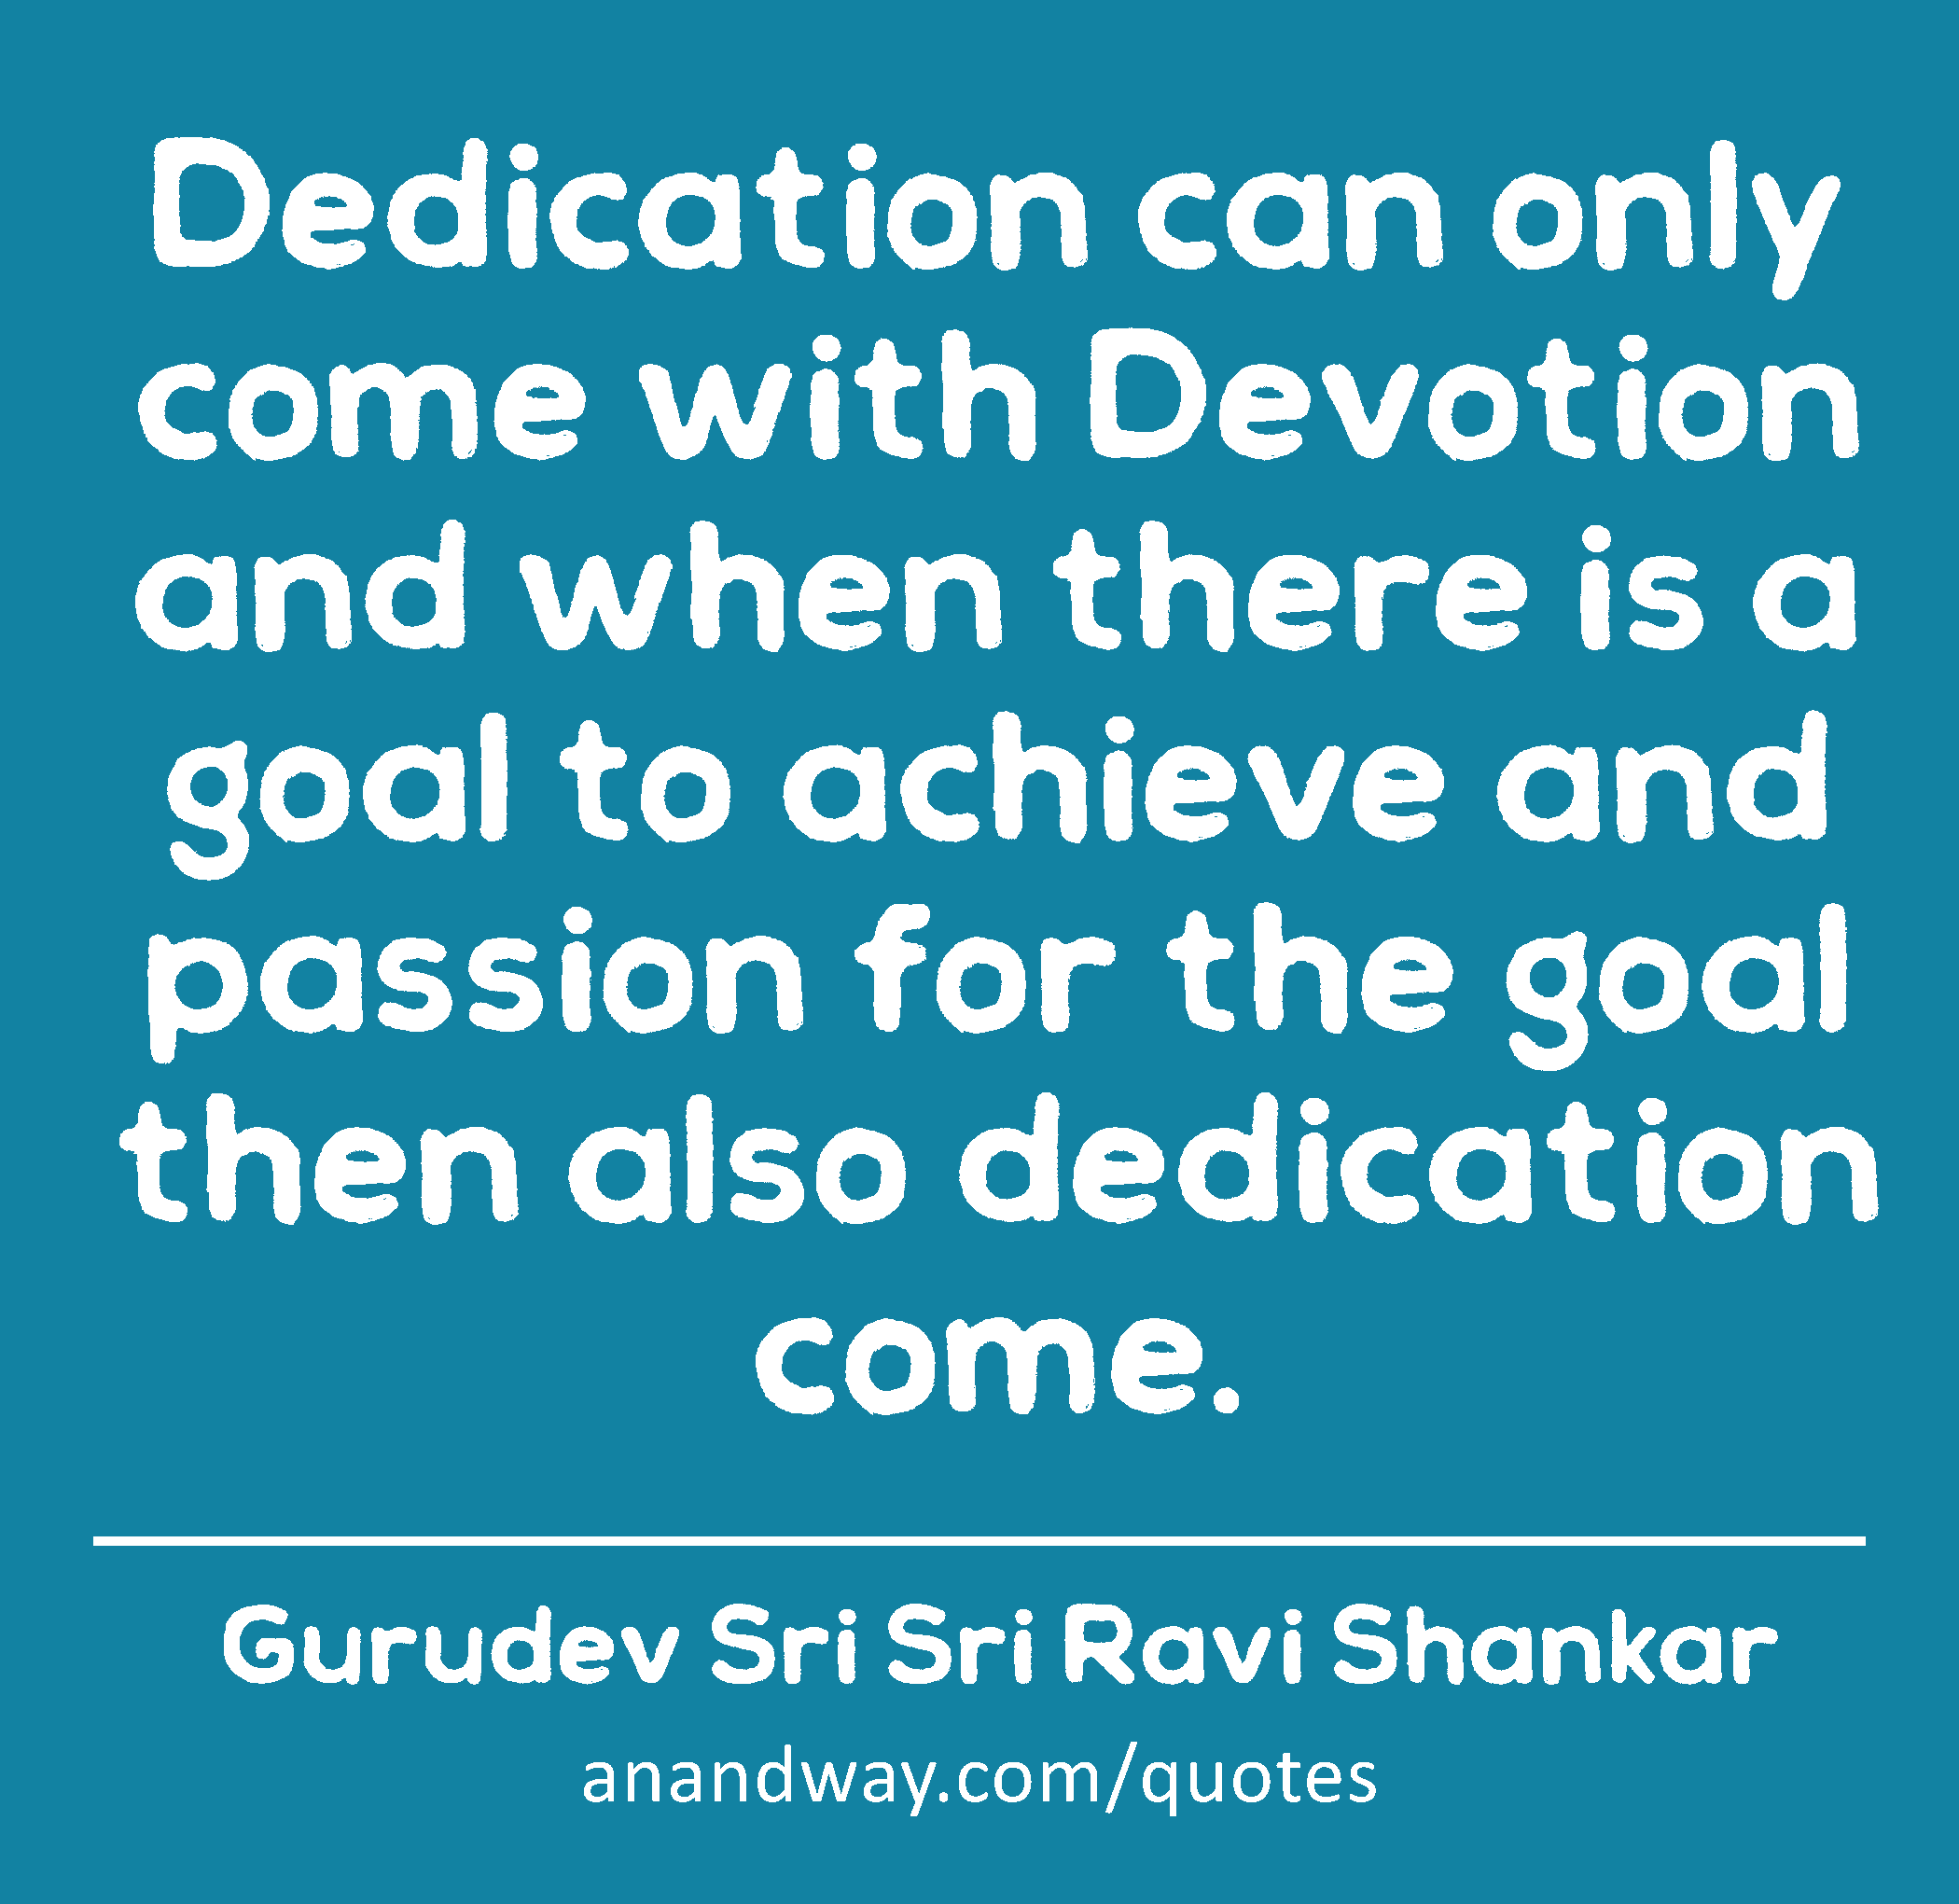 Dedication can only come with Devotion and when there is a goal to achieve and passion for the goal
 -Gurudev Sri Sri Ravi Shankar